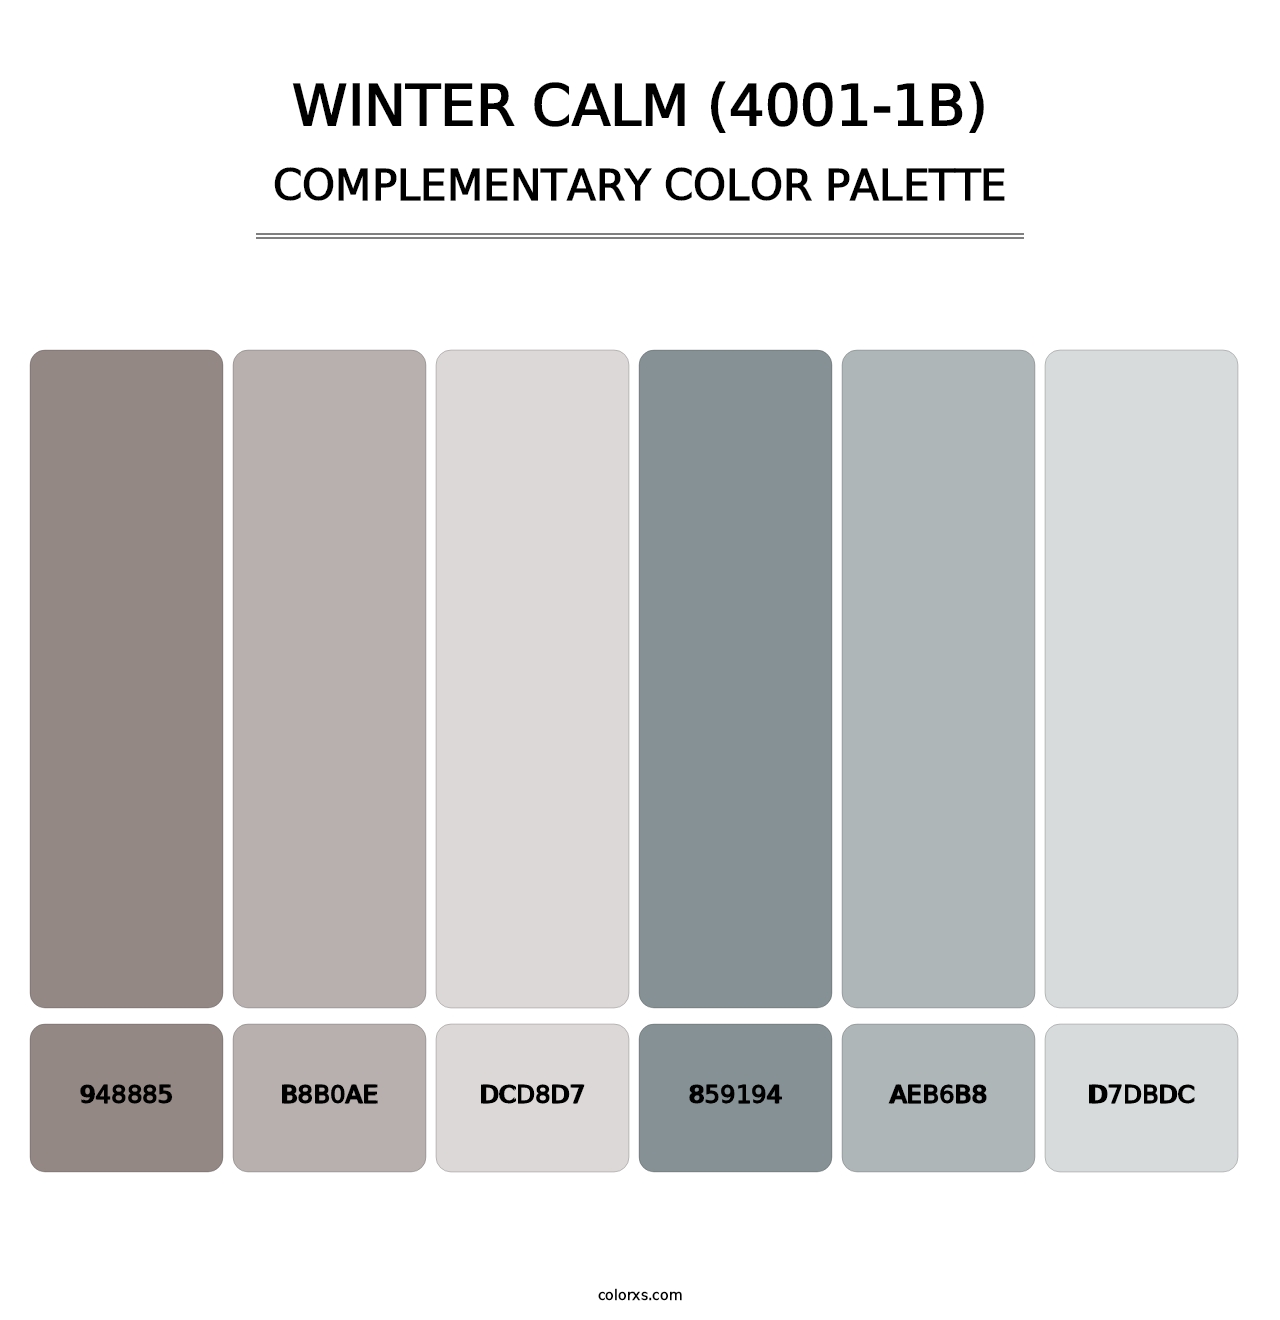 Winter Calm (4001-1B) - Complementary Color Palette